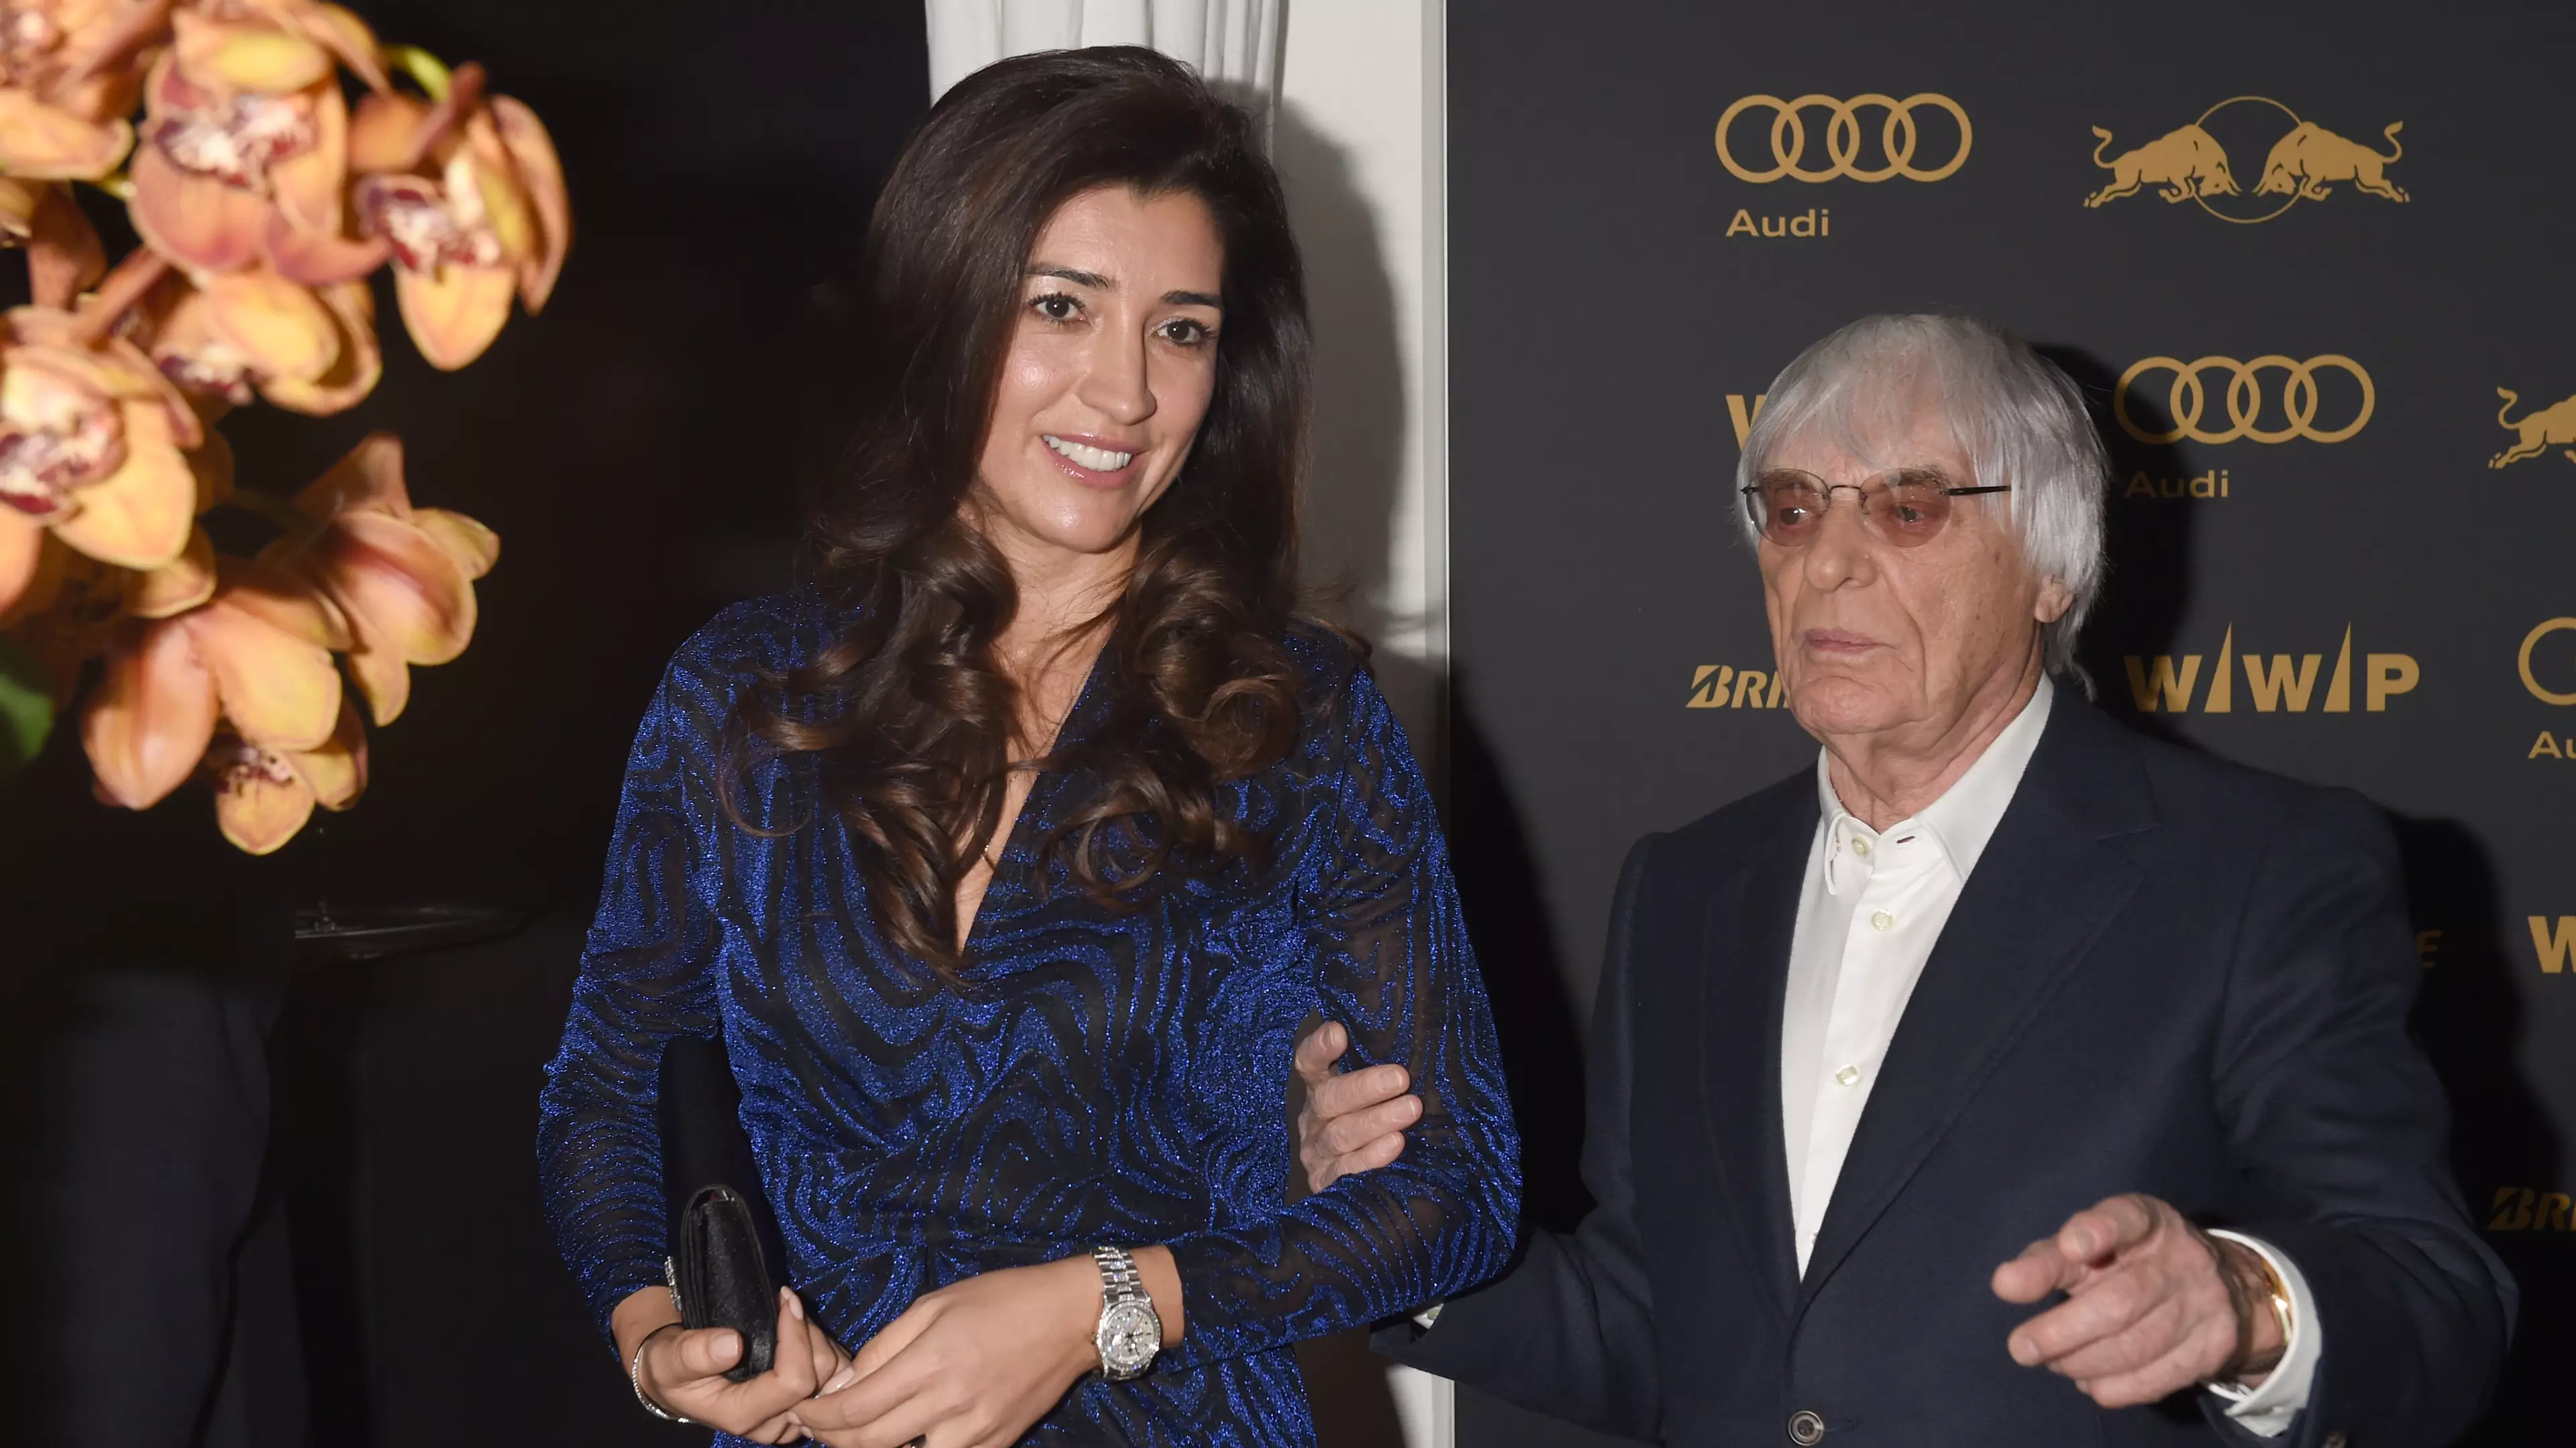 F1 Mogul Bernie Ecclestone, 89, To Become Father For The Fourth Time